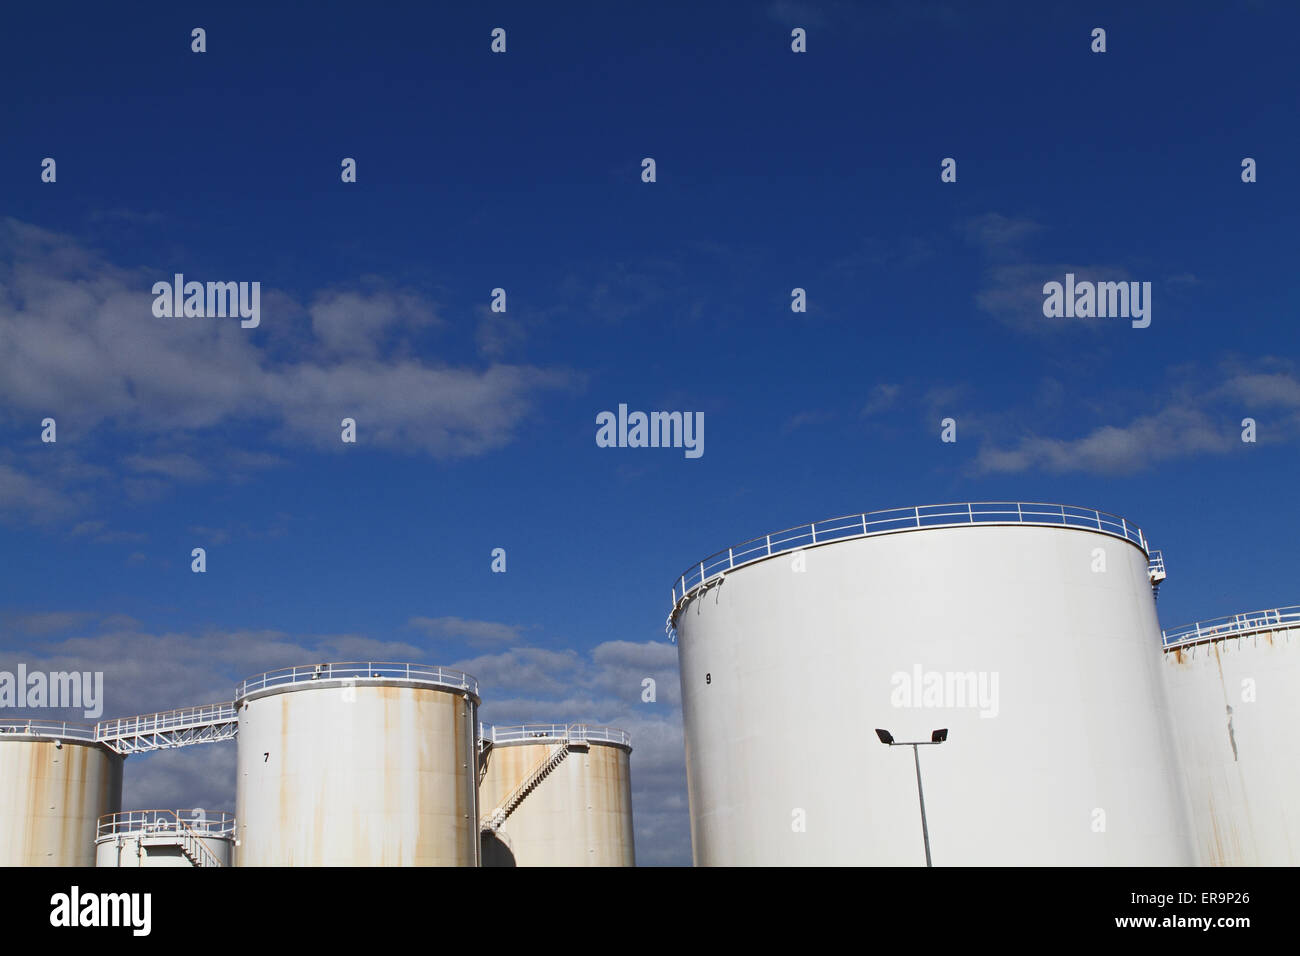 Oil containers against a blue sky Stock Photo